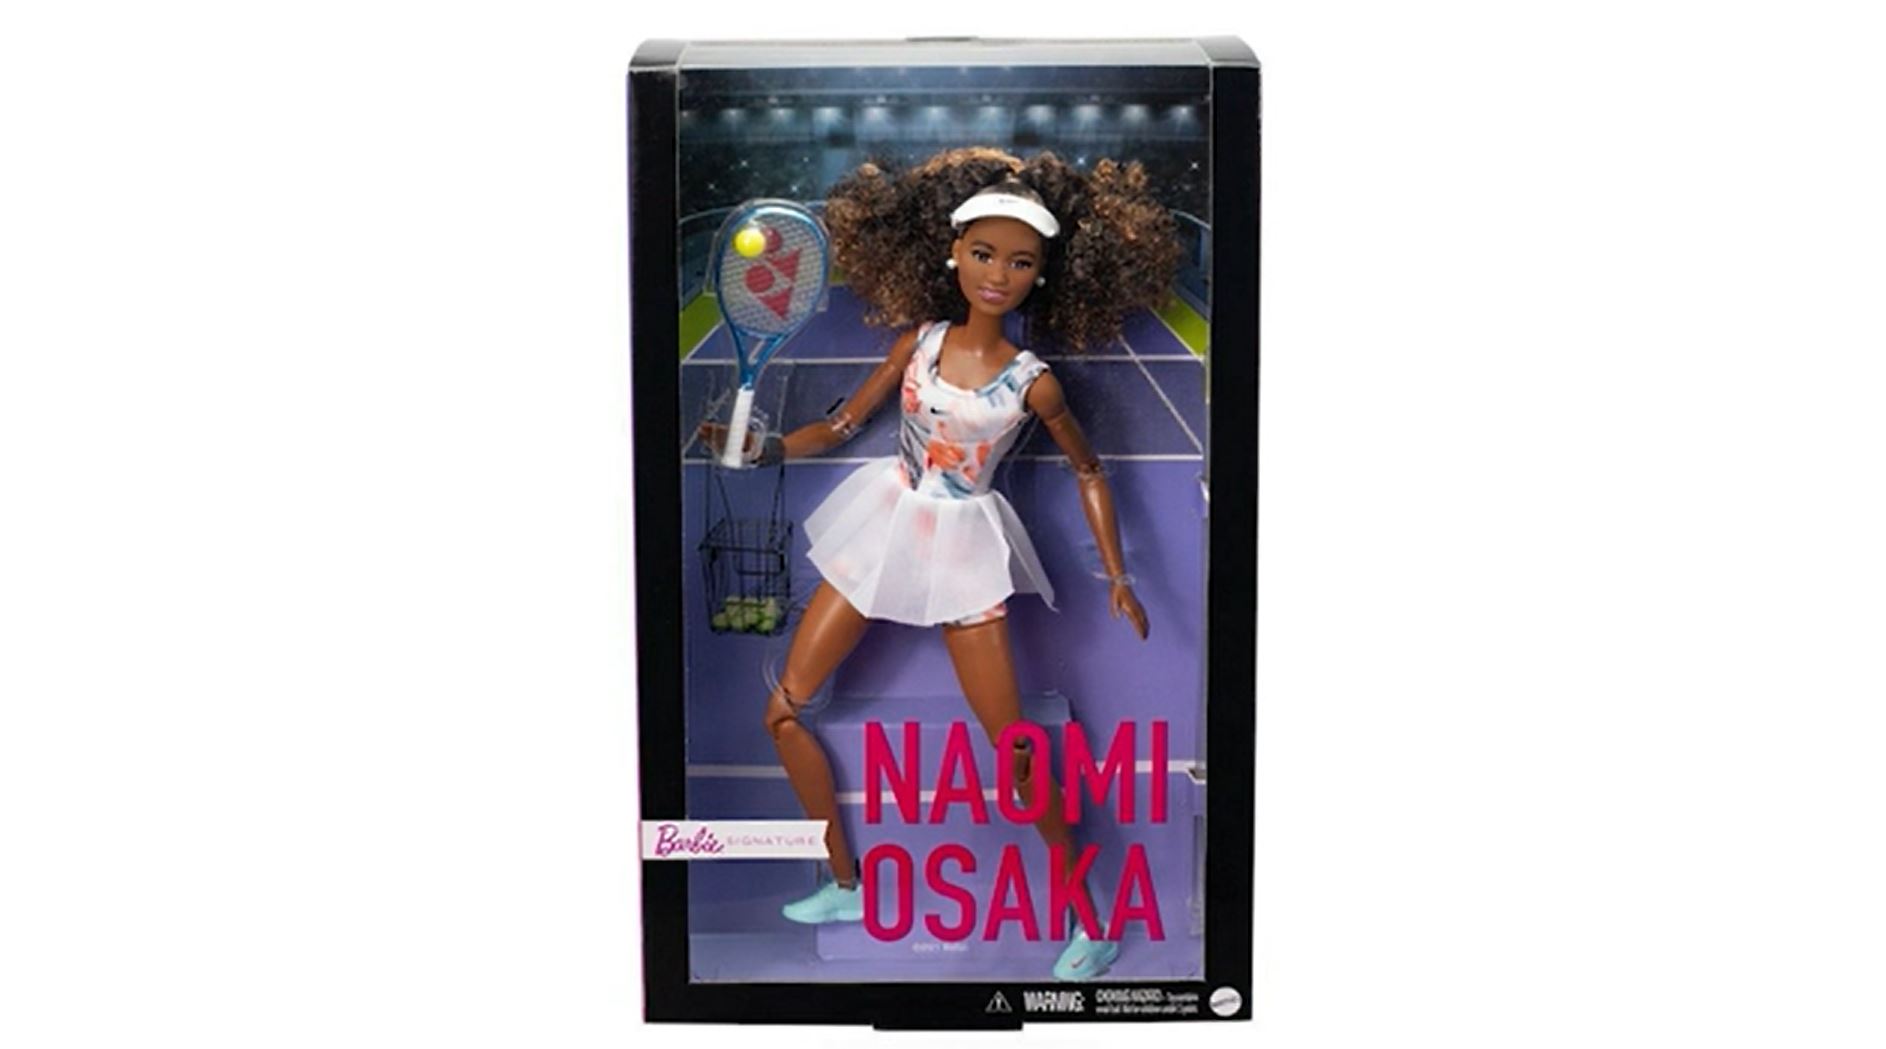 Naomi Osaka Joins the Mattel Family With Her Own Barbie Doll